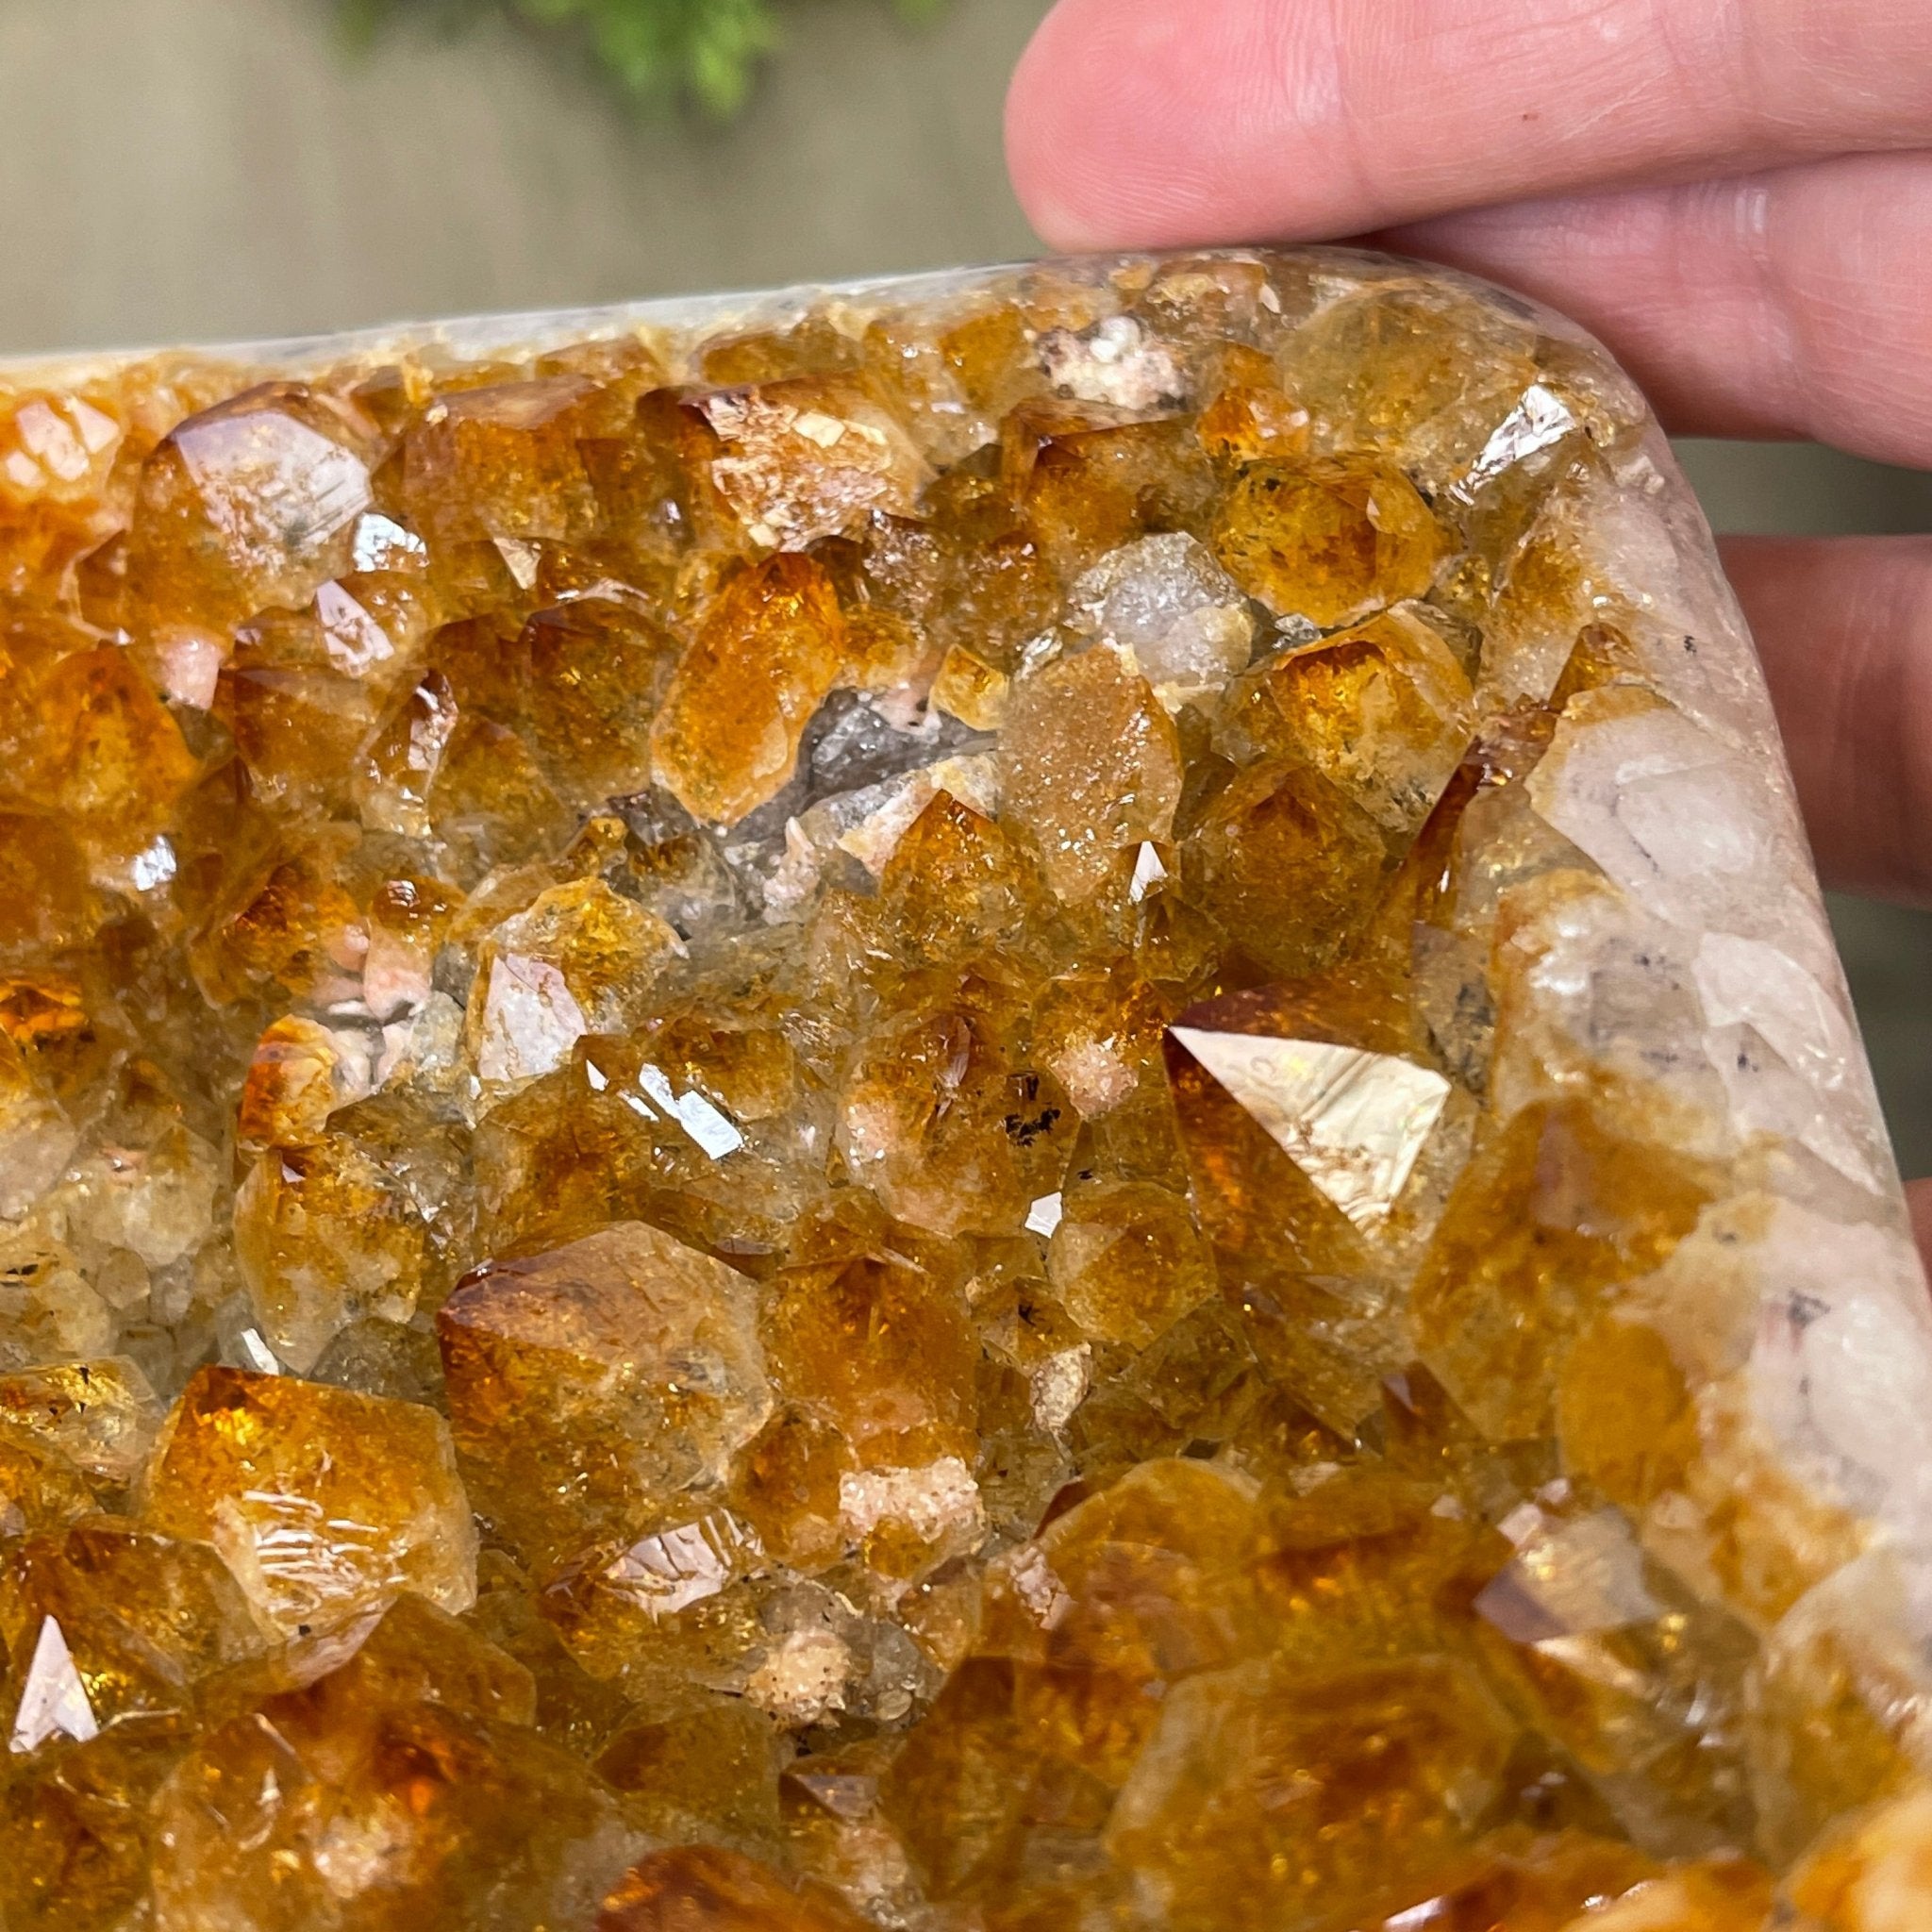 Extra Plus Quality Brazilian Citrine Geode Coffee Table, 53.3 lbs, 17.8" tall on metal base #1386-0017 by Brazil Gems - Brazil GemsBrazil GemsExtra Plus Quality Brazilian Citrine Geode Coffee Table, 53.3 lbs, 17.8" tall on metal base #1386-0017 by Brazil GemsTables: Coffee1386-0017